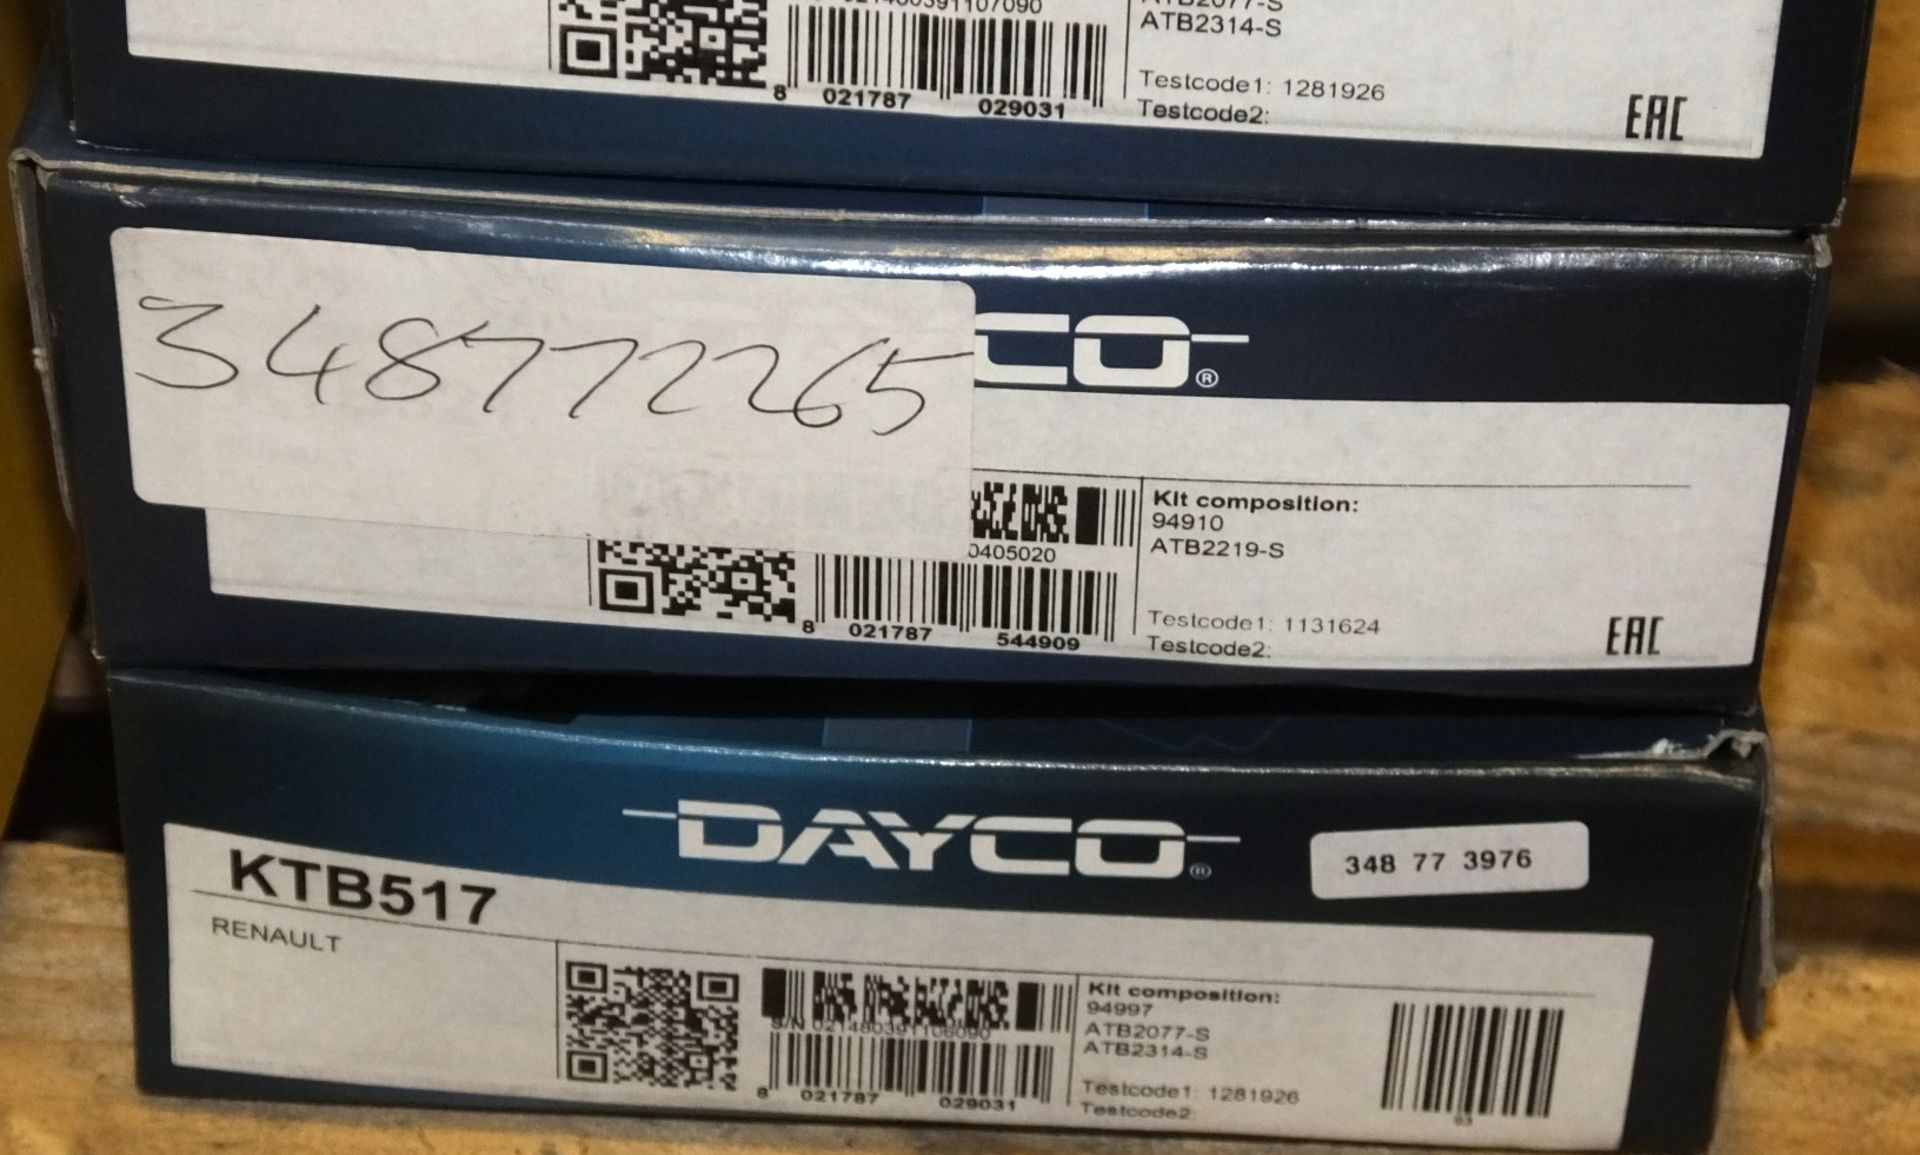 5x Dayco Timing Belt Kits - Please see pictures for examples of model numbers - Image 3 of 3